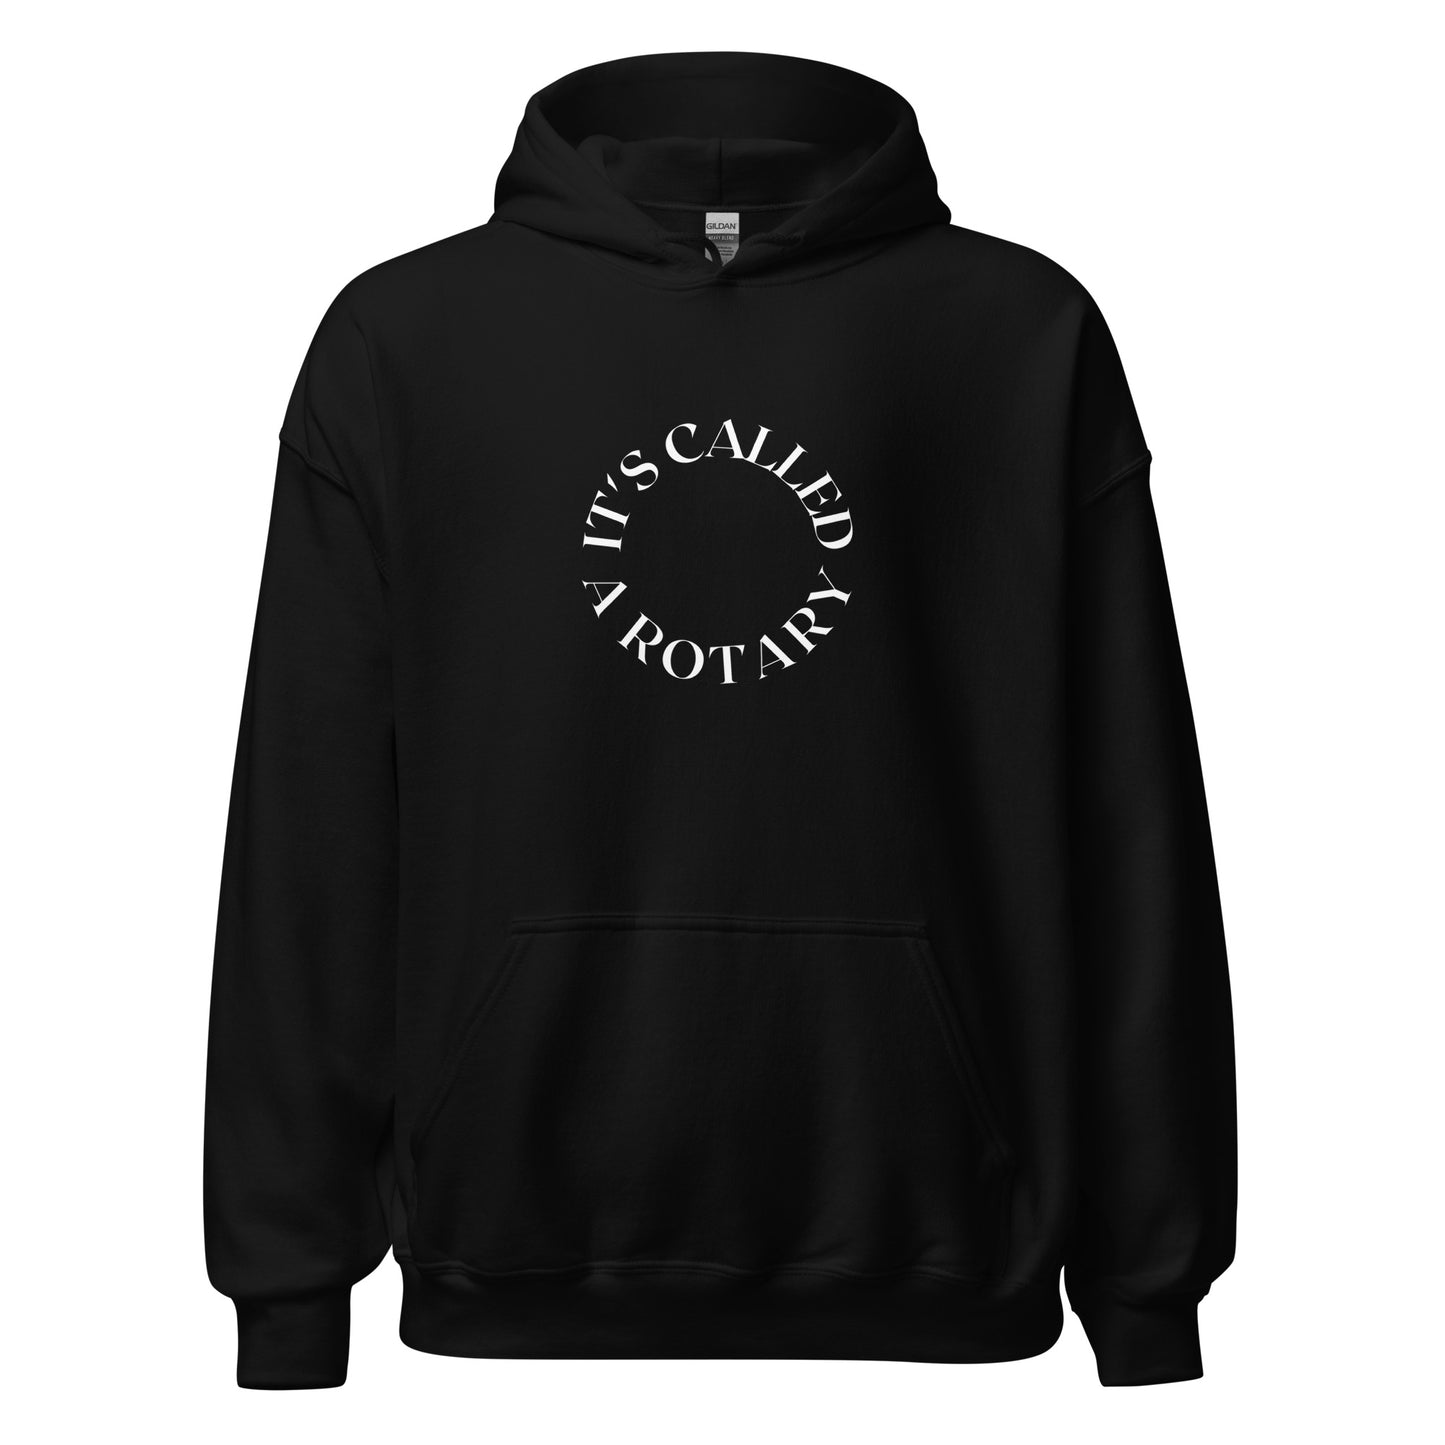 black hoodie that saying "it's called a rotary" in white lettering shaped in a circle